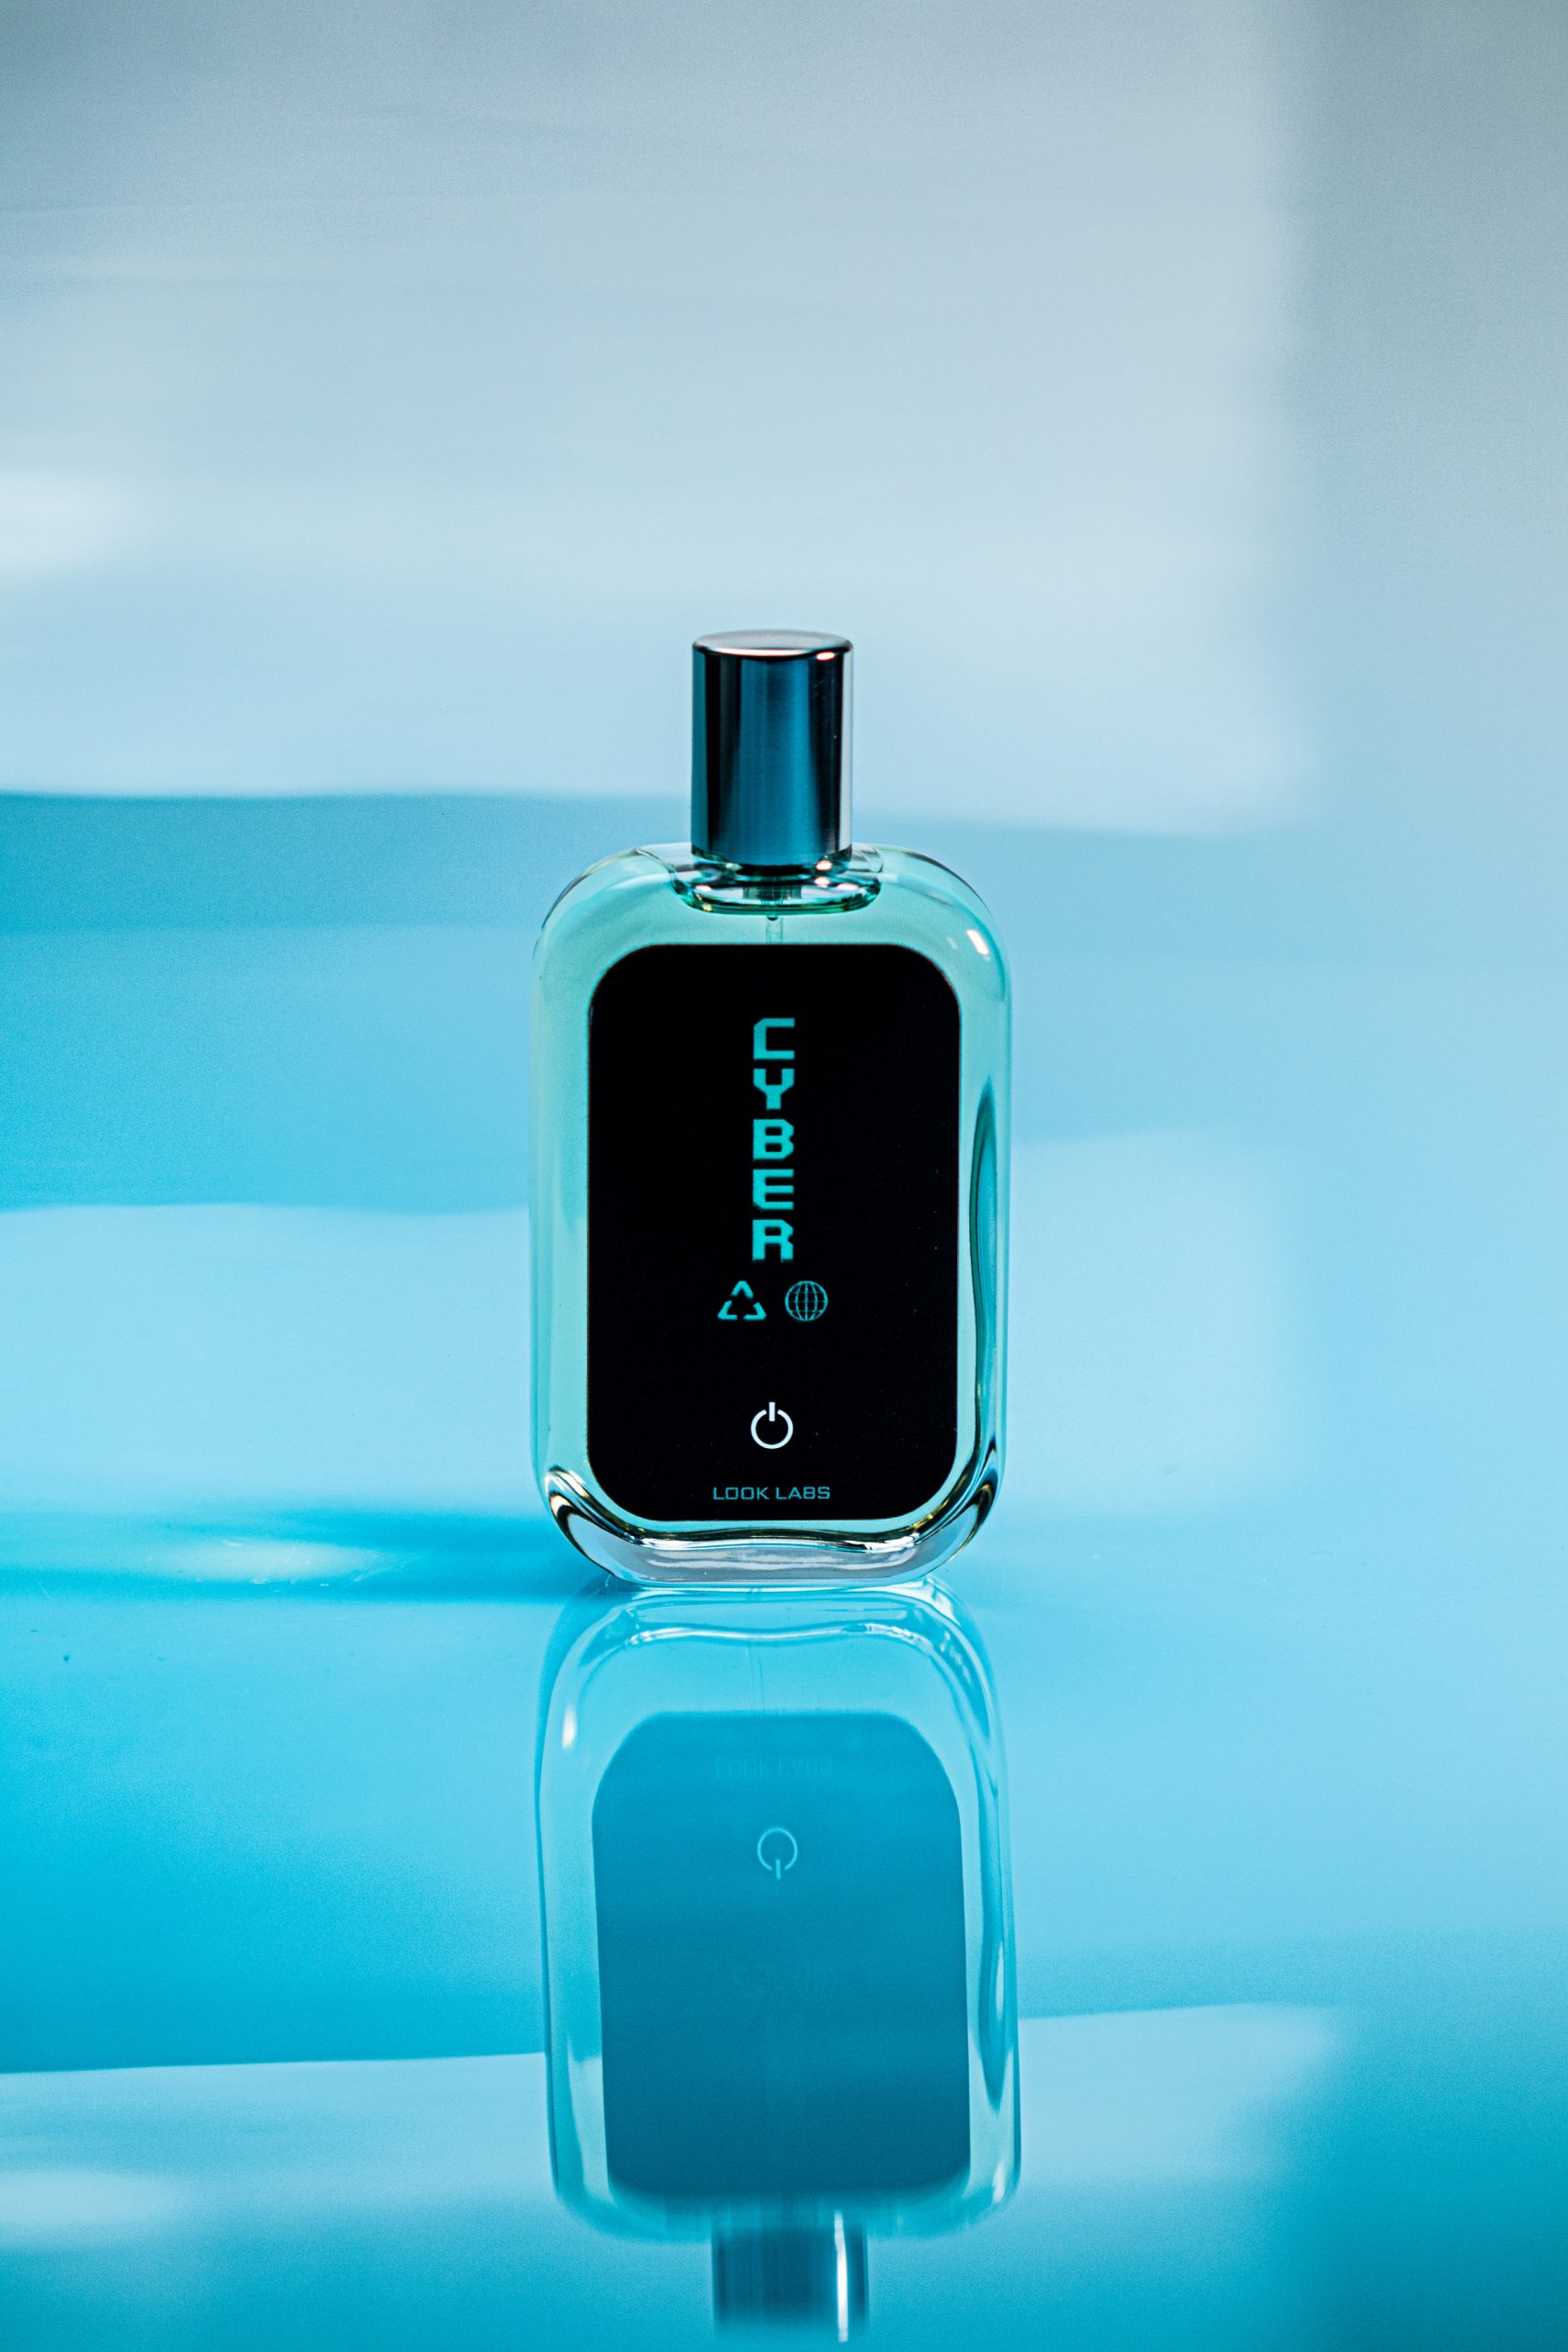 The perfume is named Cyber eau de Parfam by Look Labs